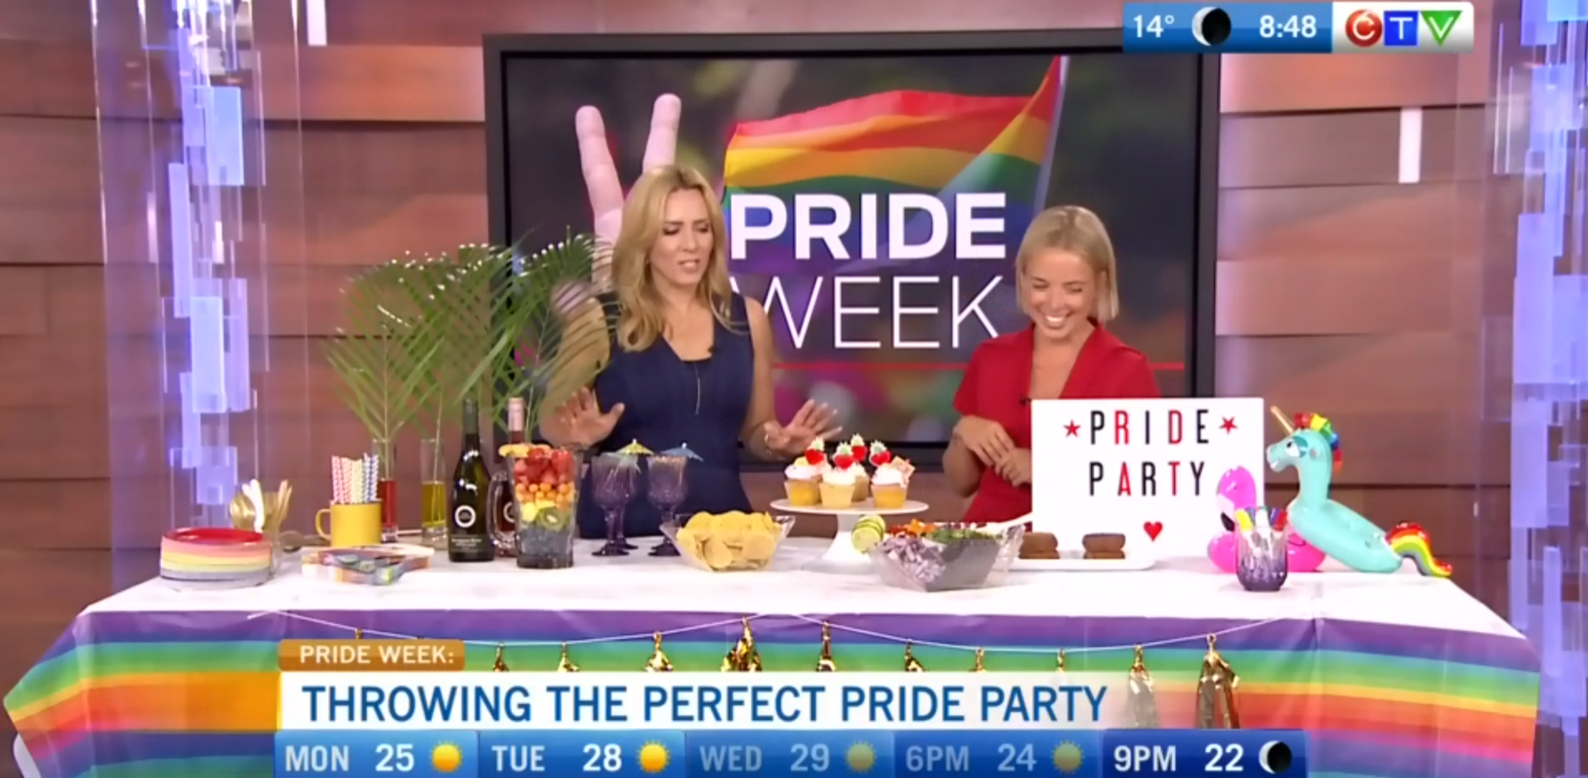 CTV Morning Live: Hosting the Ultimate Pride Party